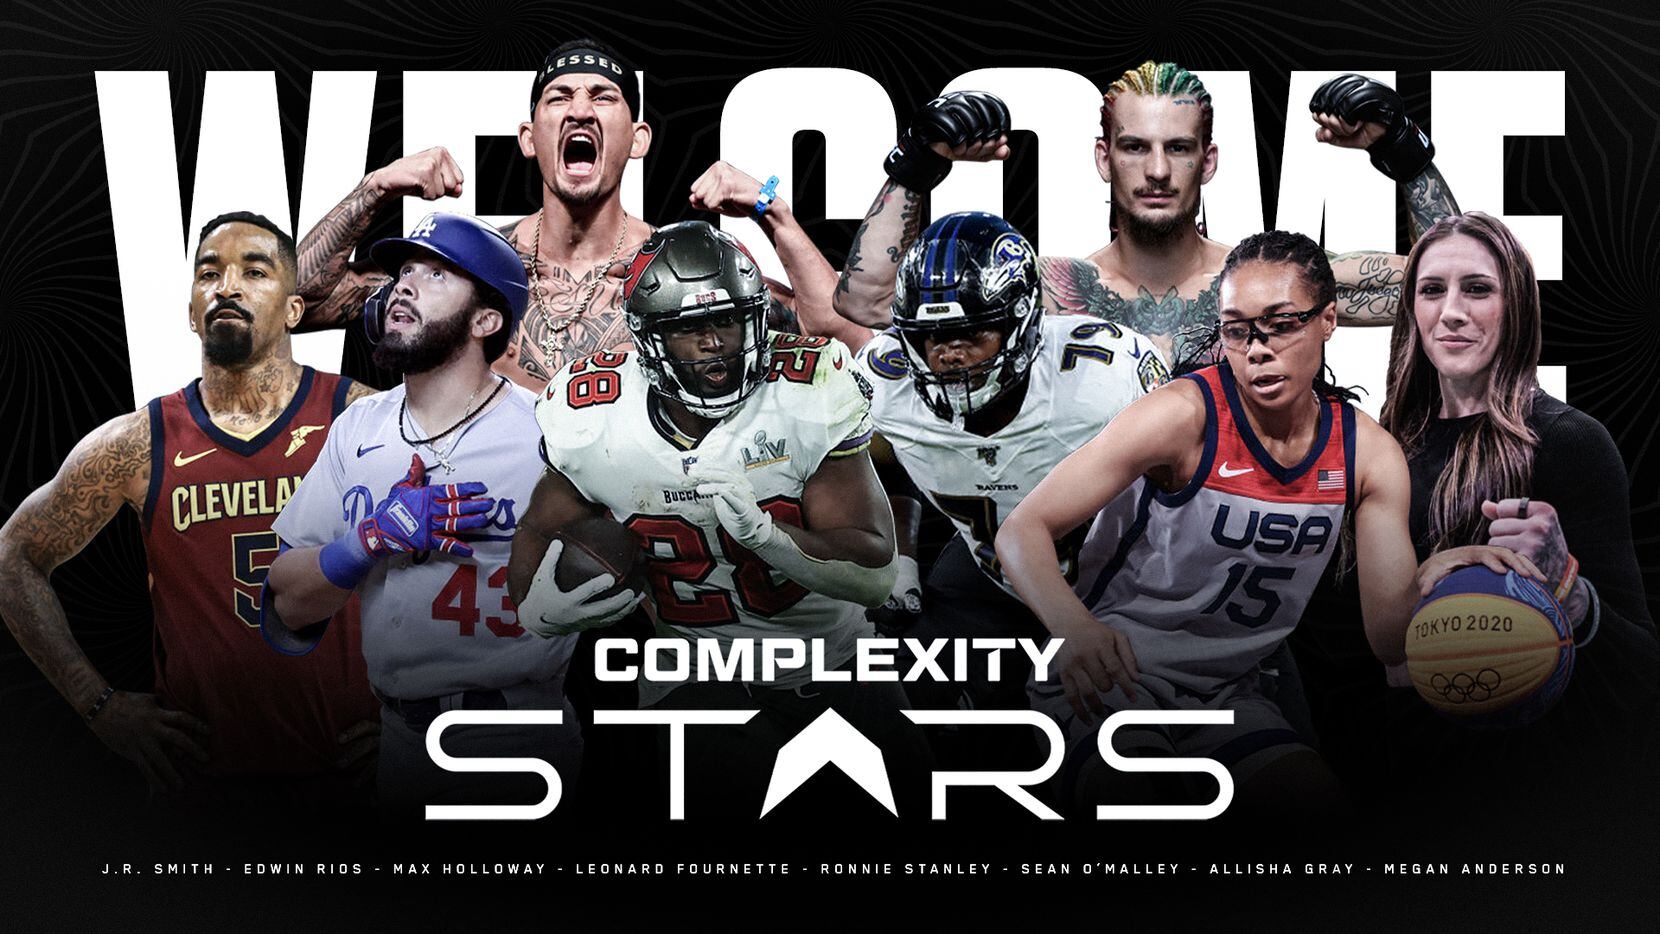 North Texas esports power Complexity Gaming announced Complexity Stars on Tuesday. The new roster filled with professional athletes including Dallas Wings player Allisha Gray aims to expand Complexity's footprint.